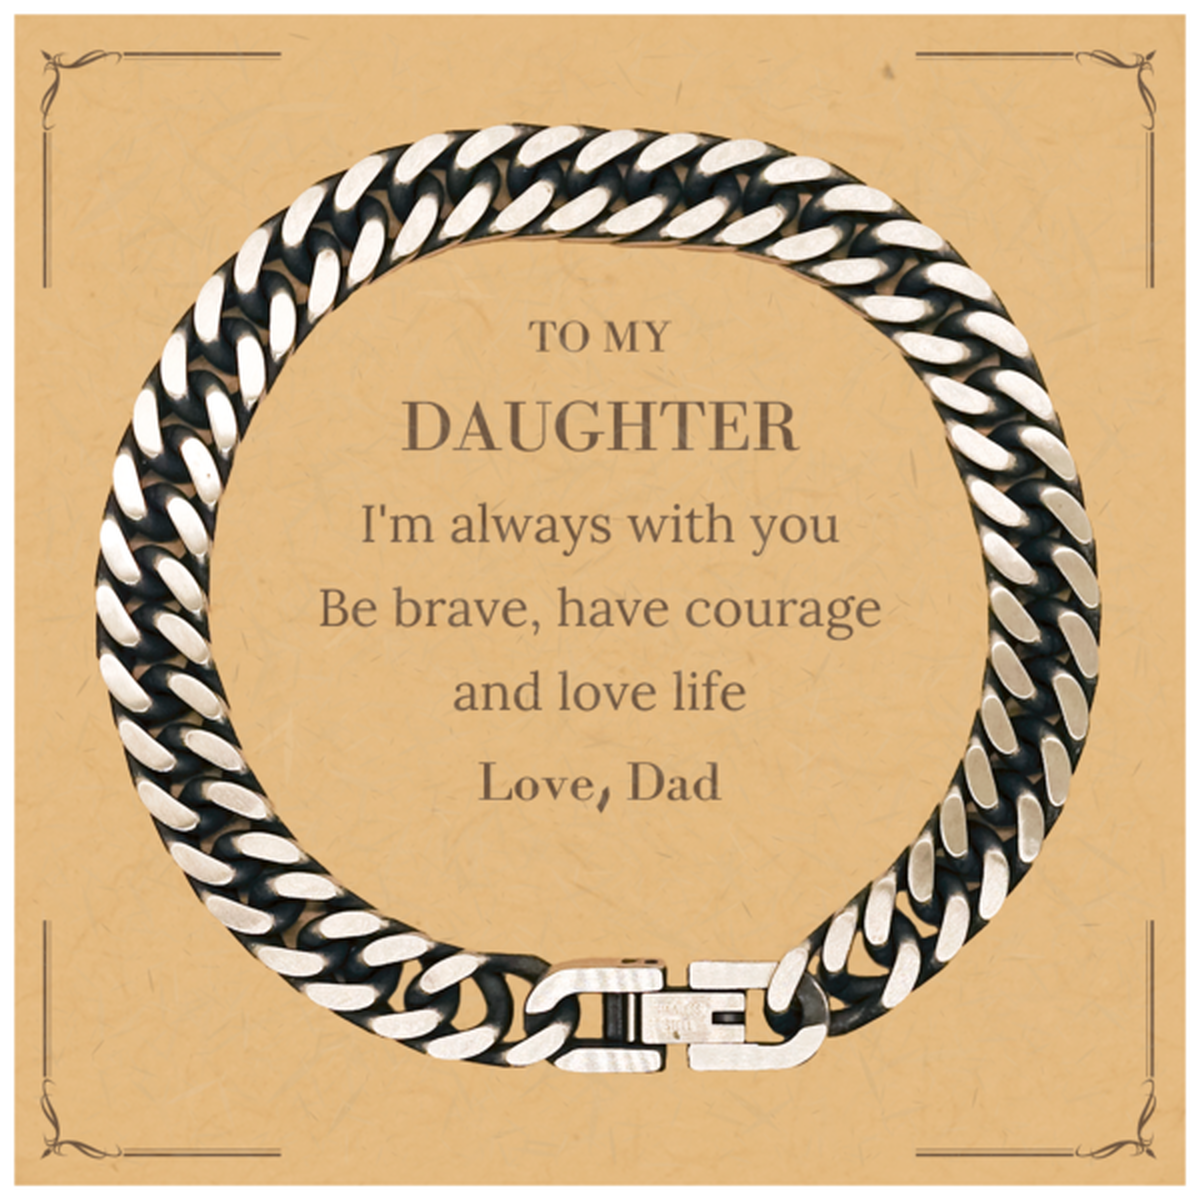 To My Daughter Gifts from Dad, Unique Cuban Link Chain Bracelet Inspirational Christmas Birthday Graduation Gifts for Daughter I'm always with you. Be brave, have courage and love life. Love, Dad